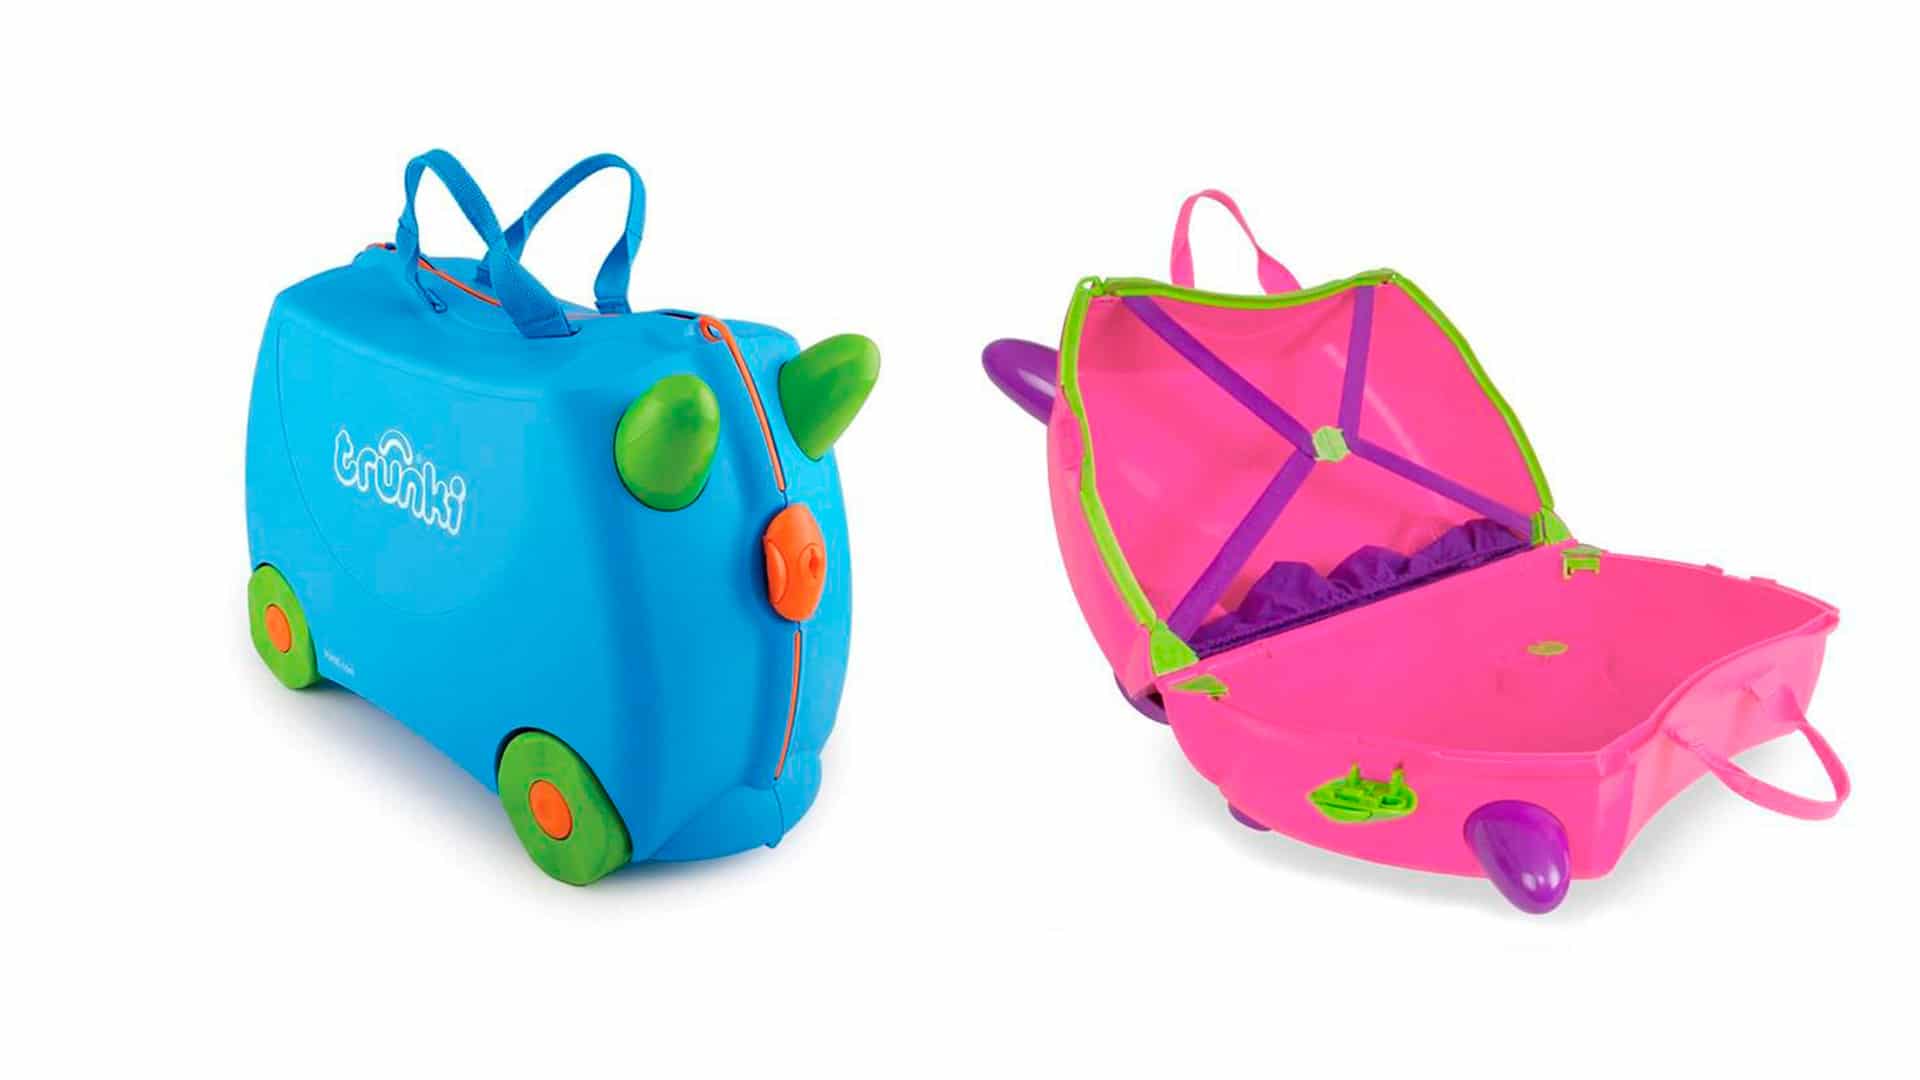 Trunki Classics in Blue and Pink